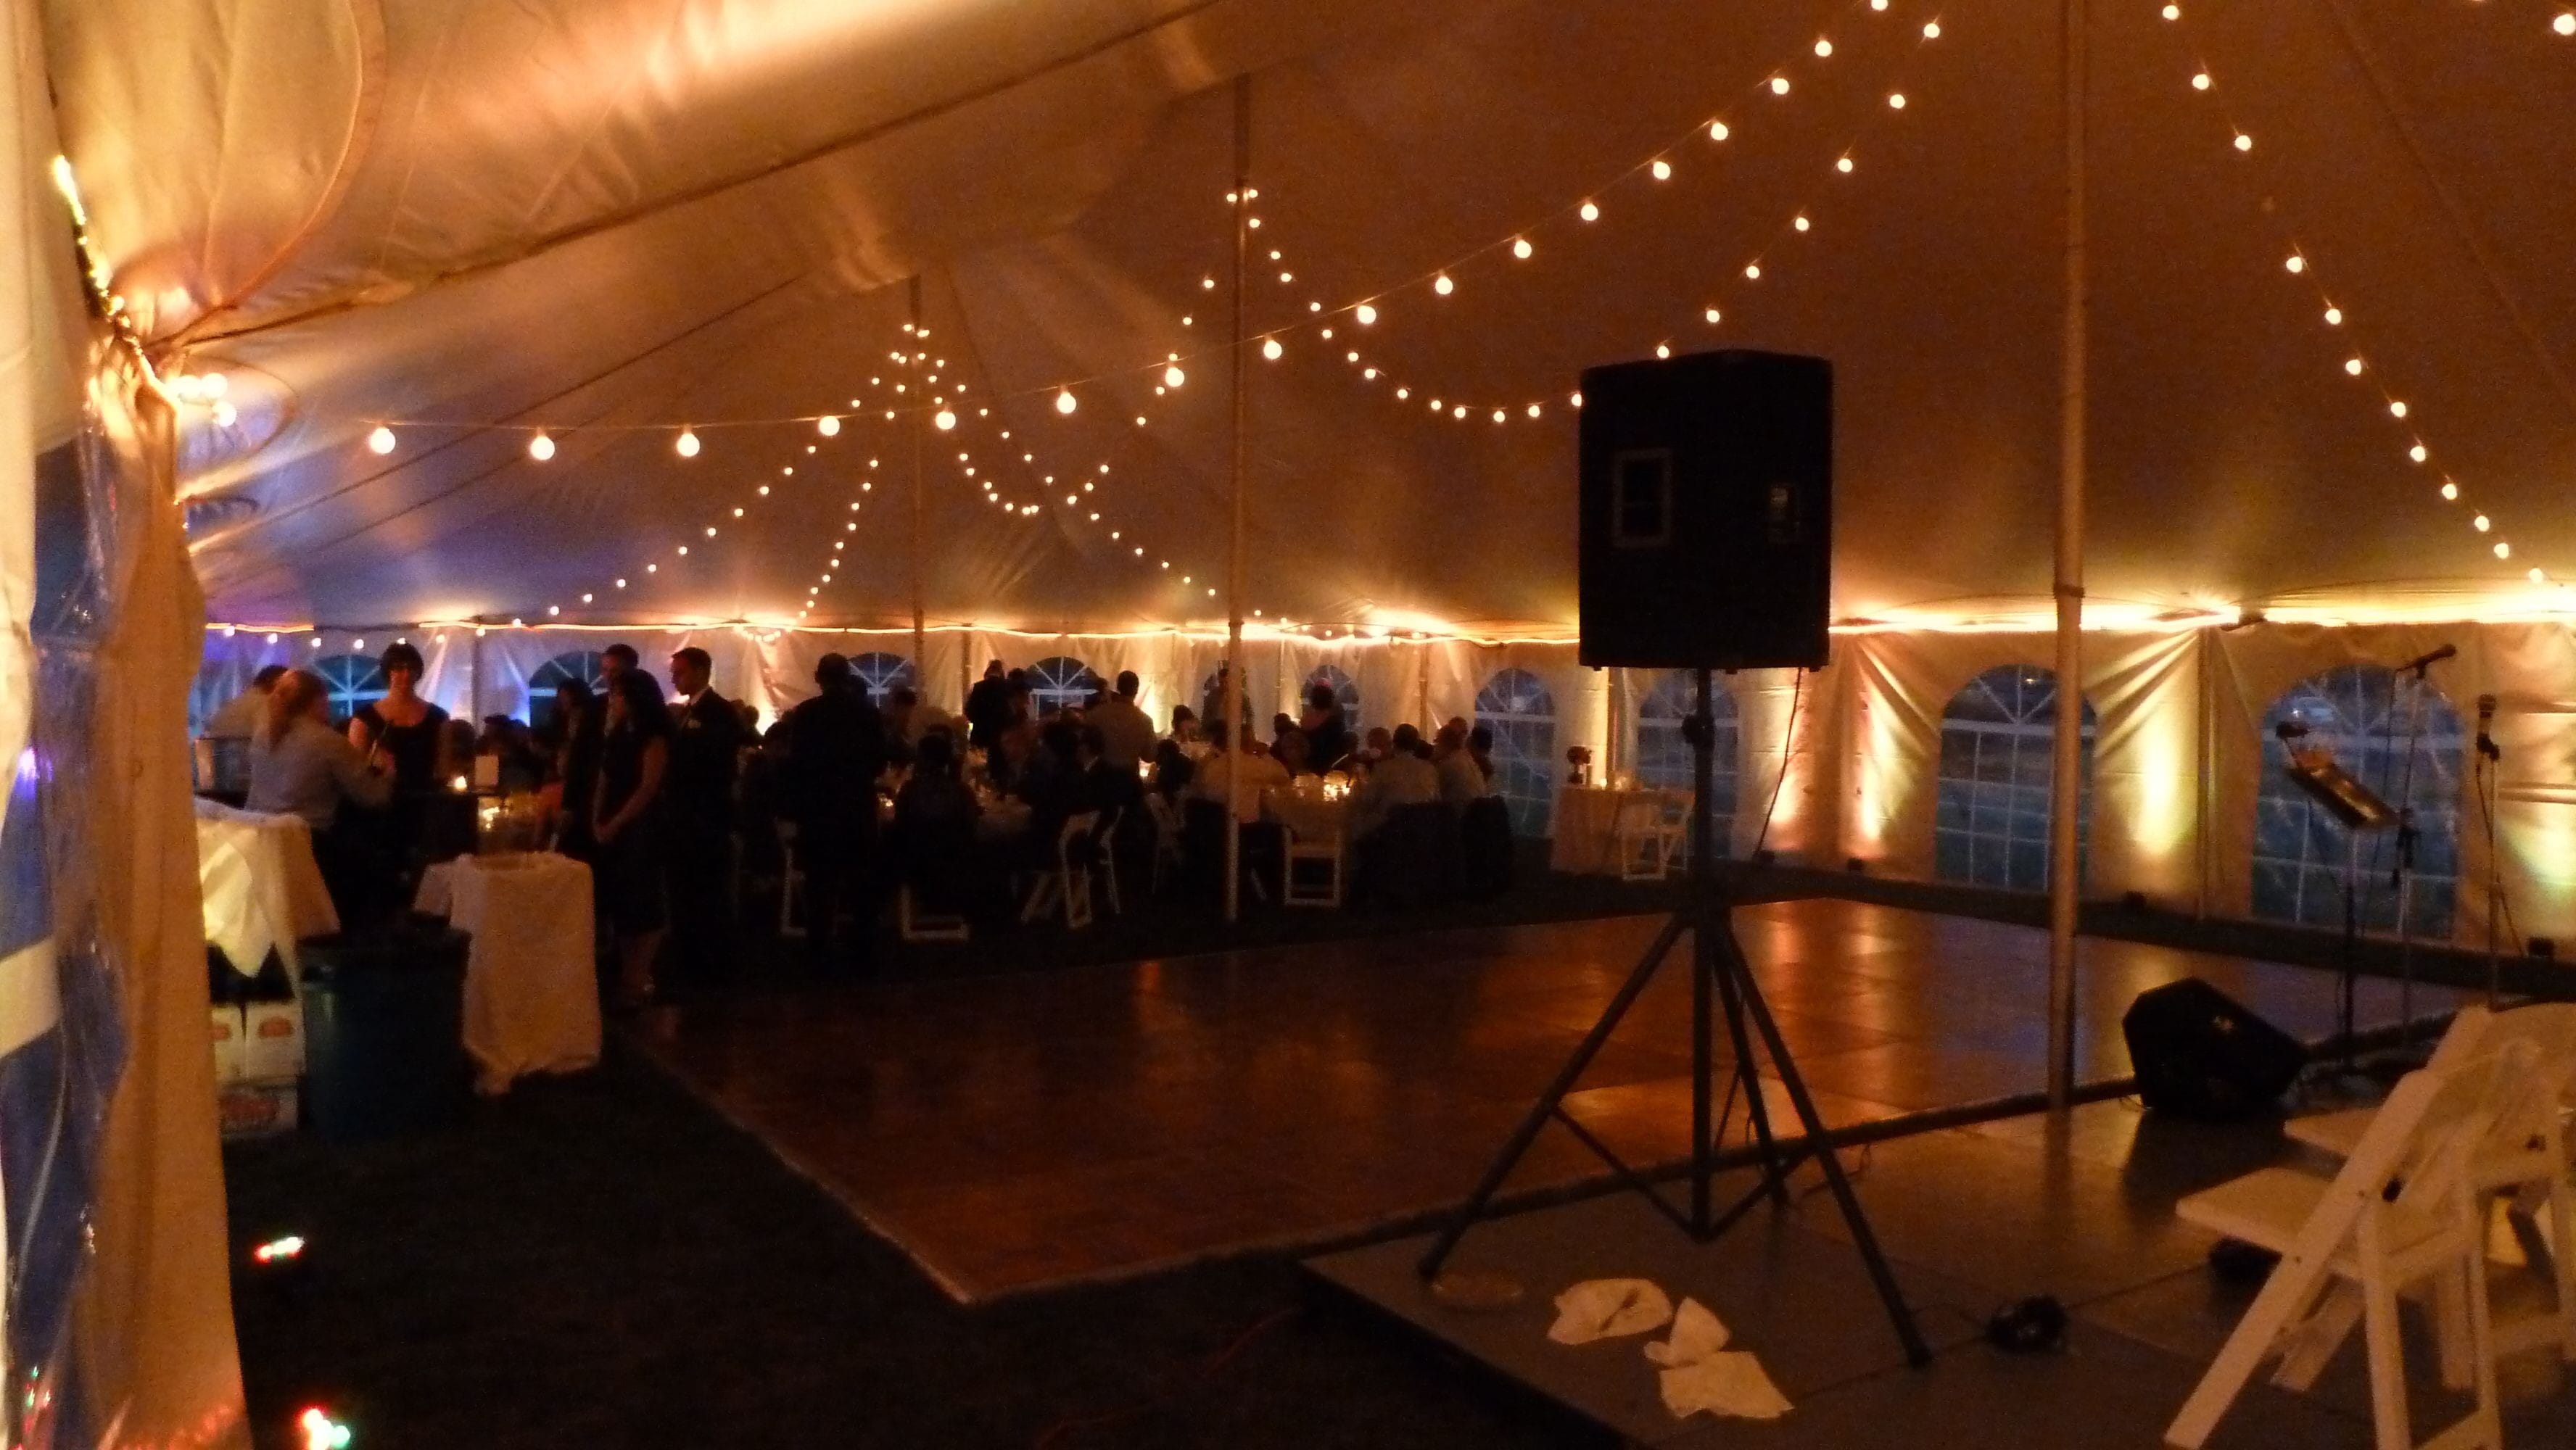 up lighting in soft gold with bistro in a tent. Up lighting by Duluth Event Lighting, bistro by @thevaultduluth